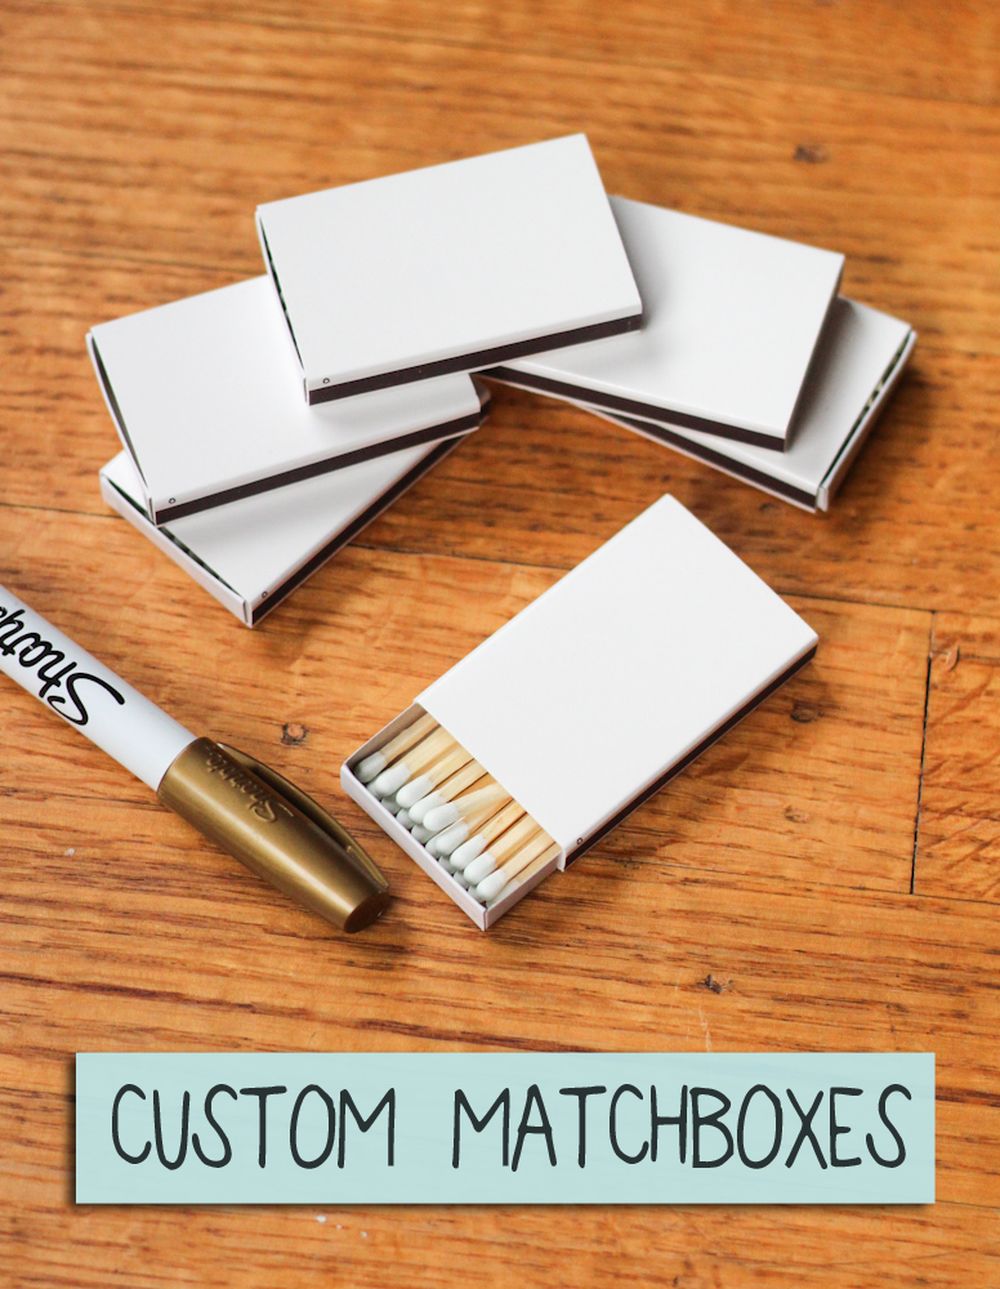 Custom matchboxes diy gifts for dad